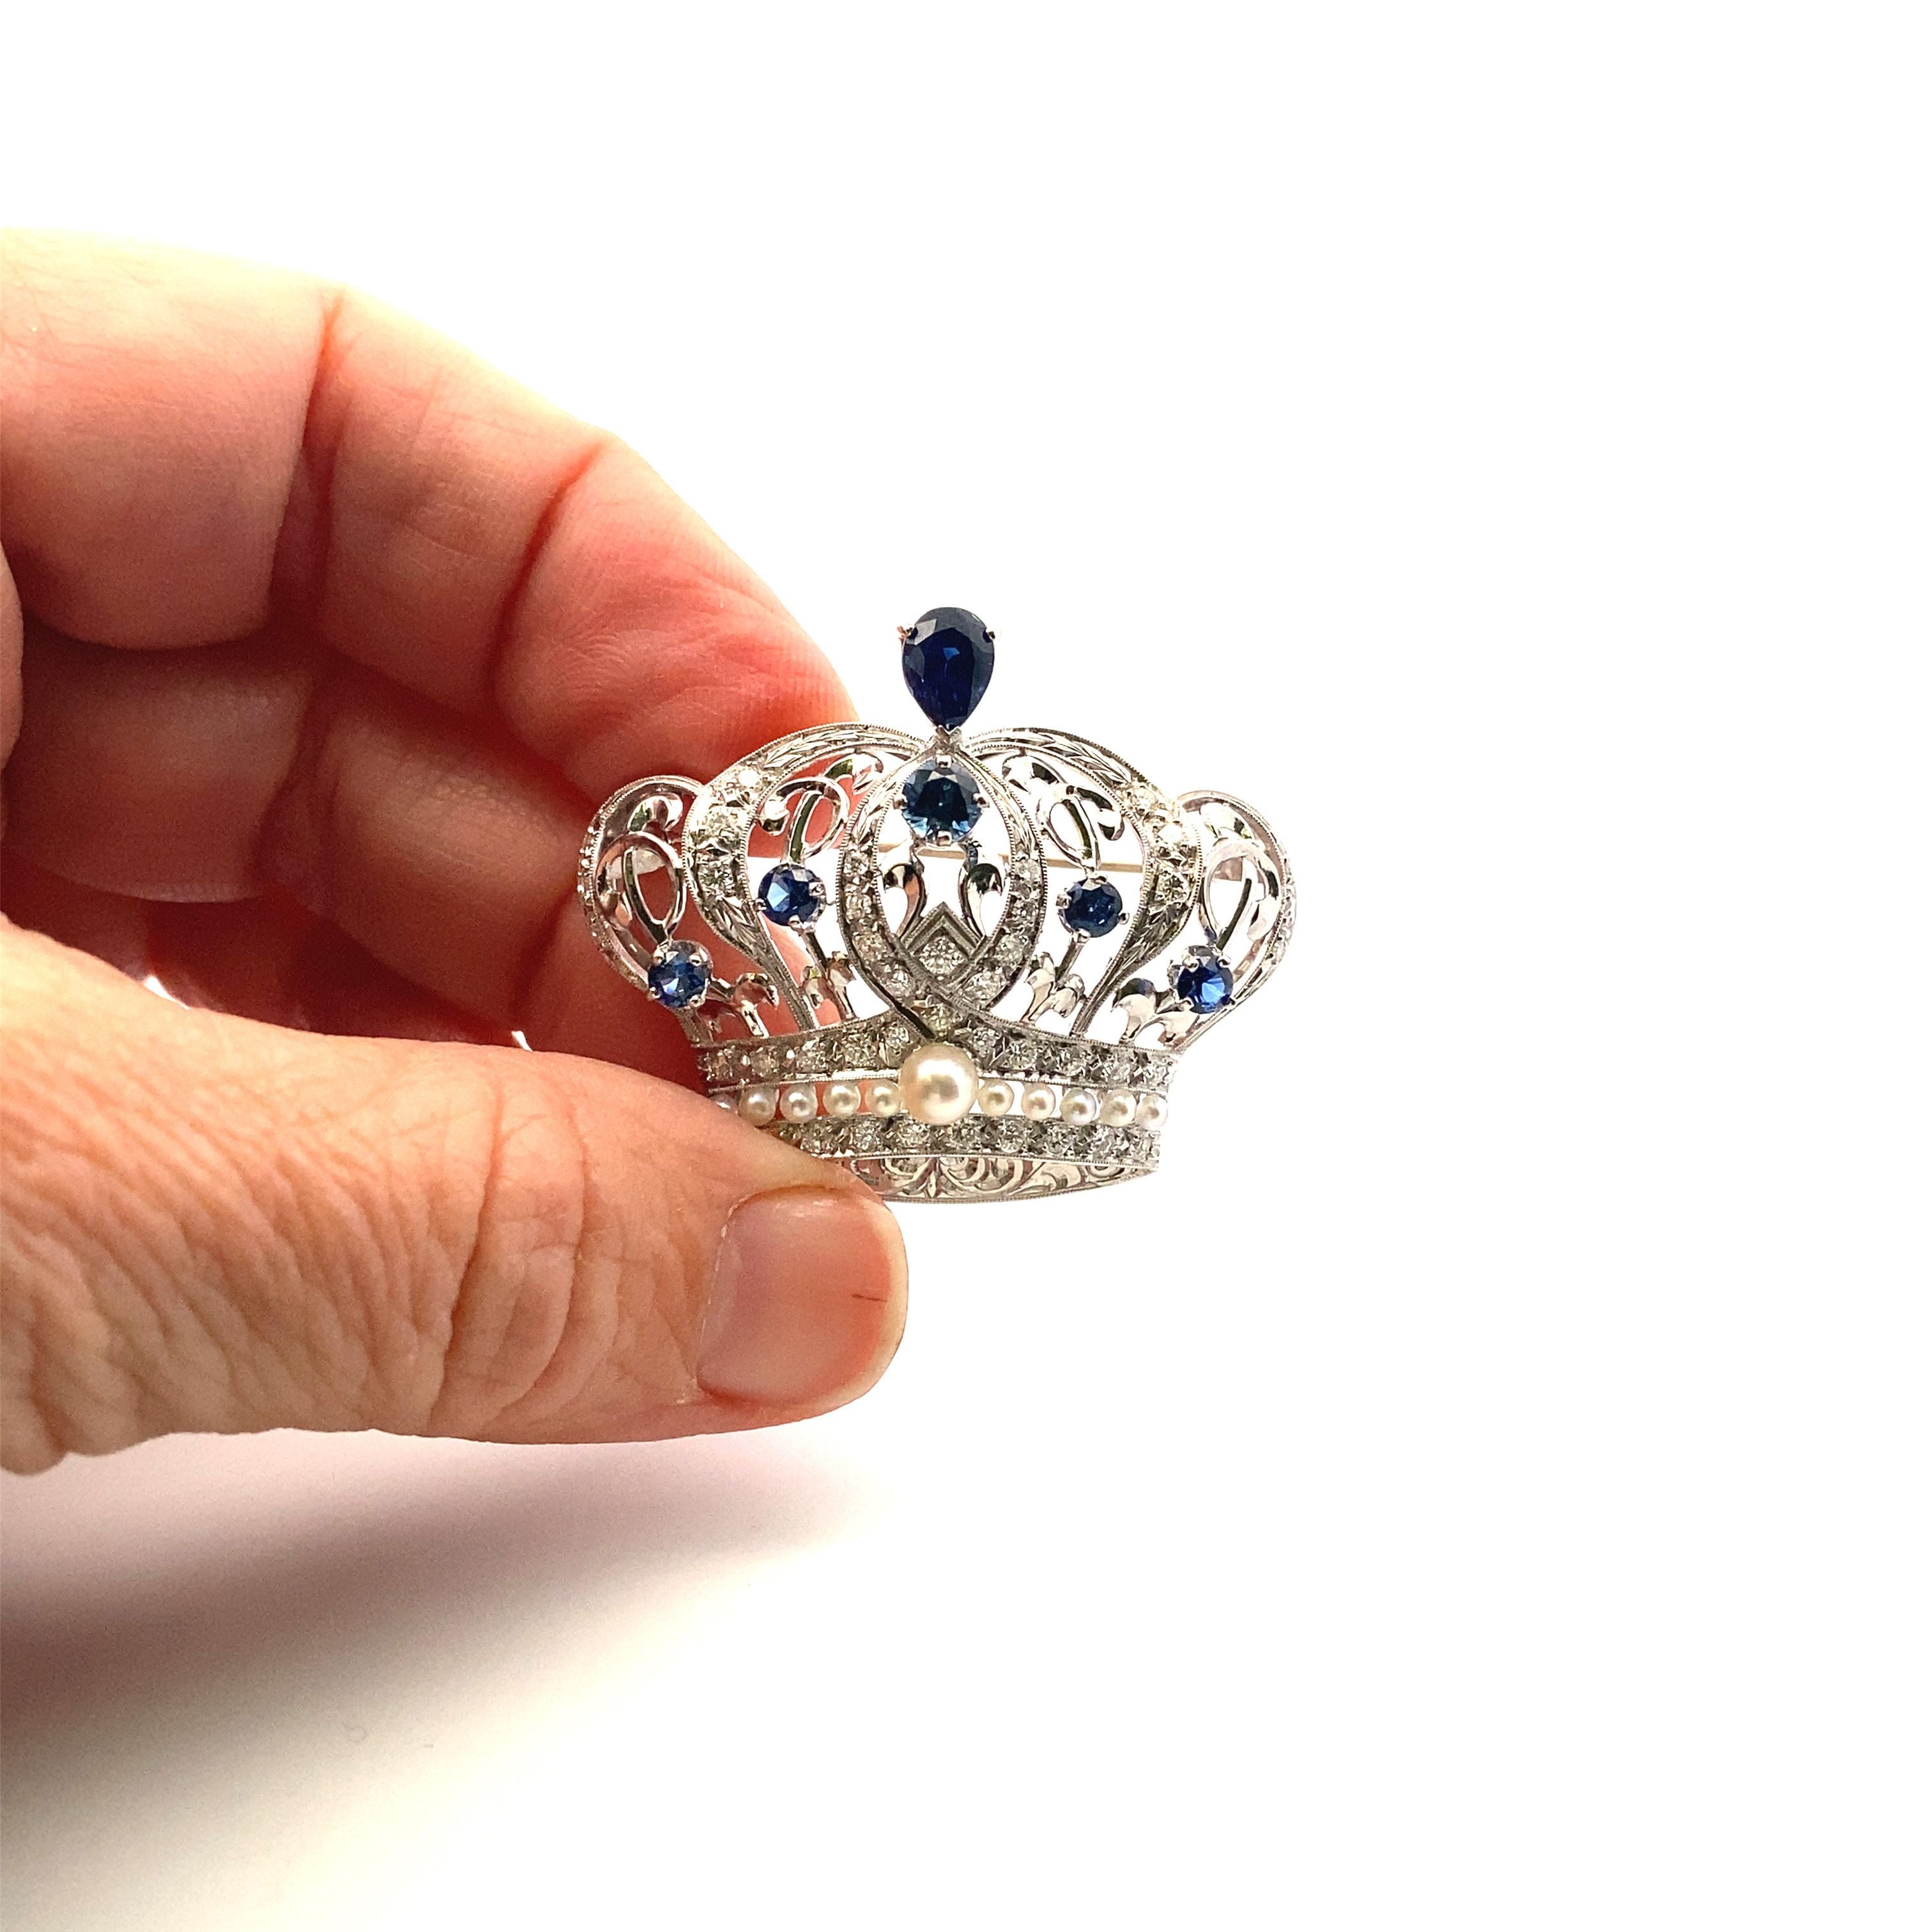 Women's or Men's Edwardian-Styled Platinum Crown Brooch with Sapphires, Diamonds and Pearls